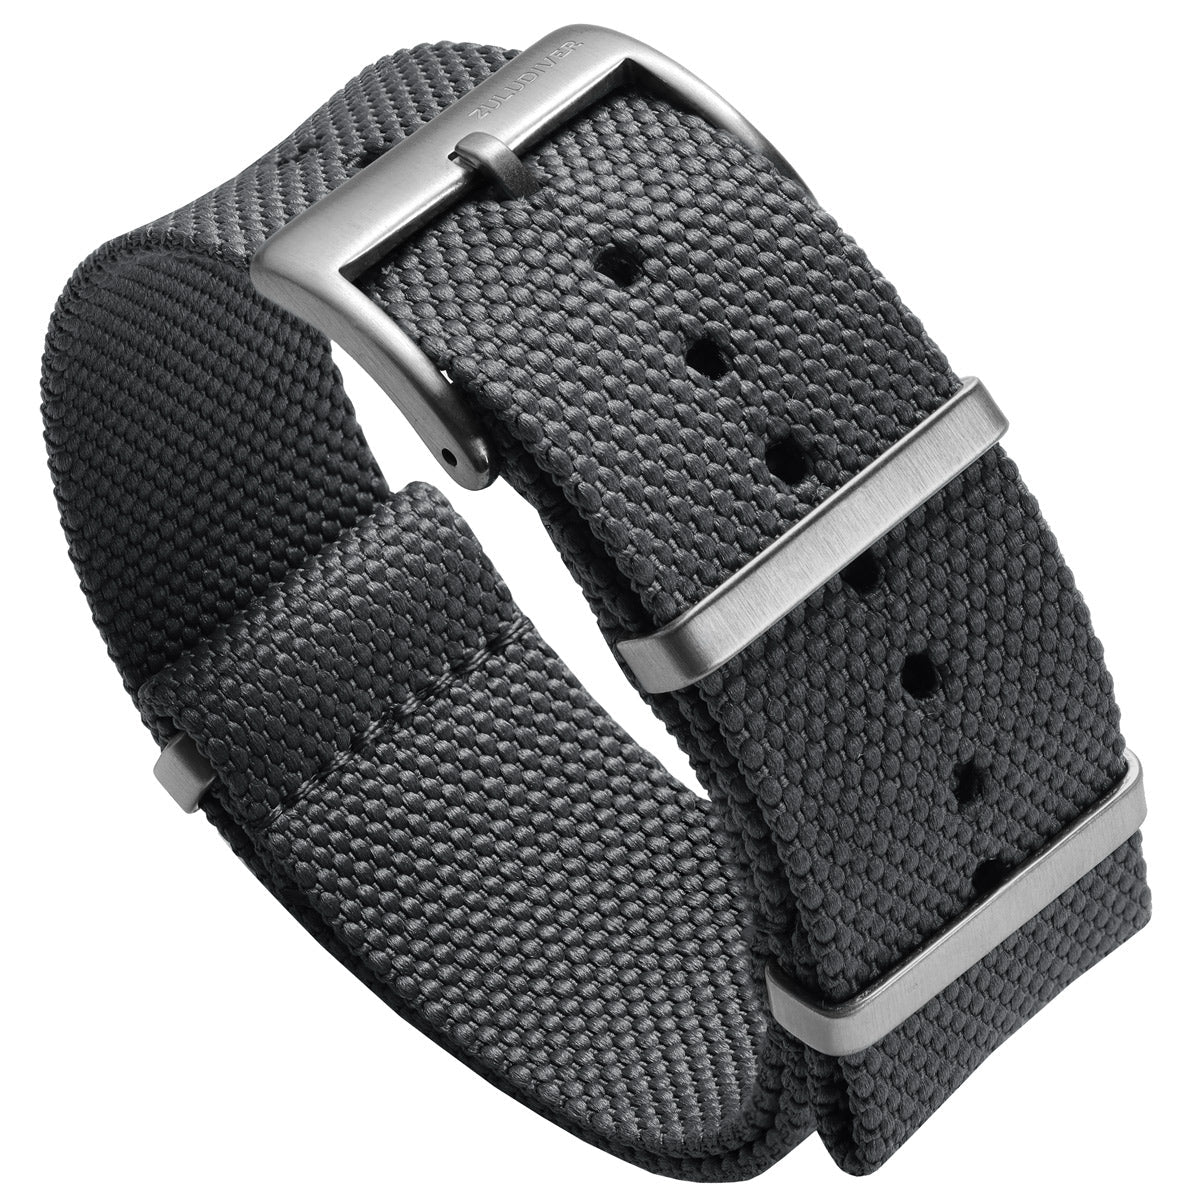 Grey woven canvas NATO watch strap with stainless steel fittings